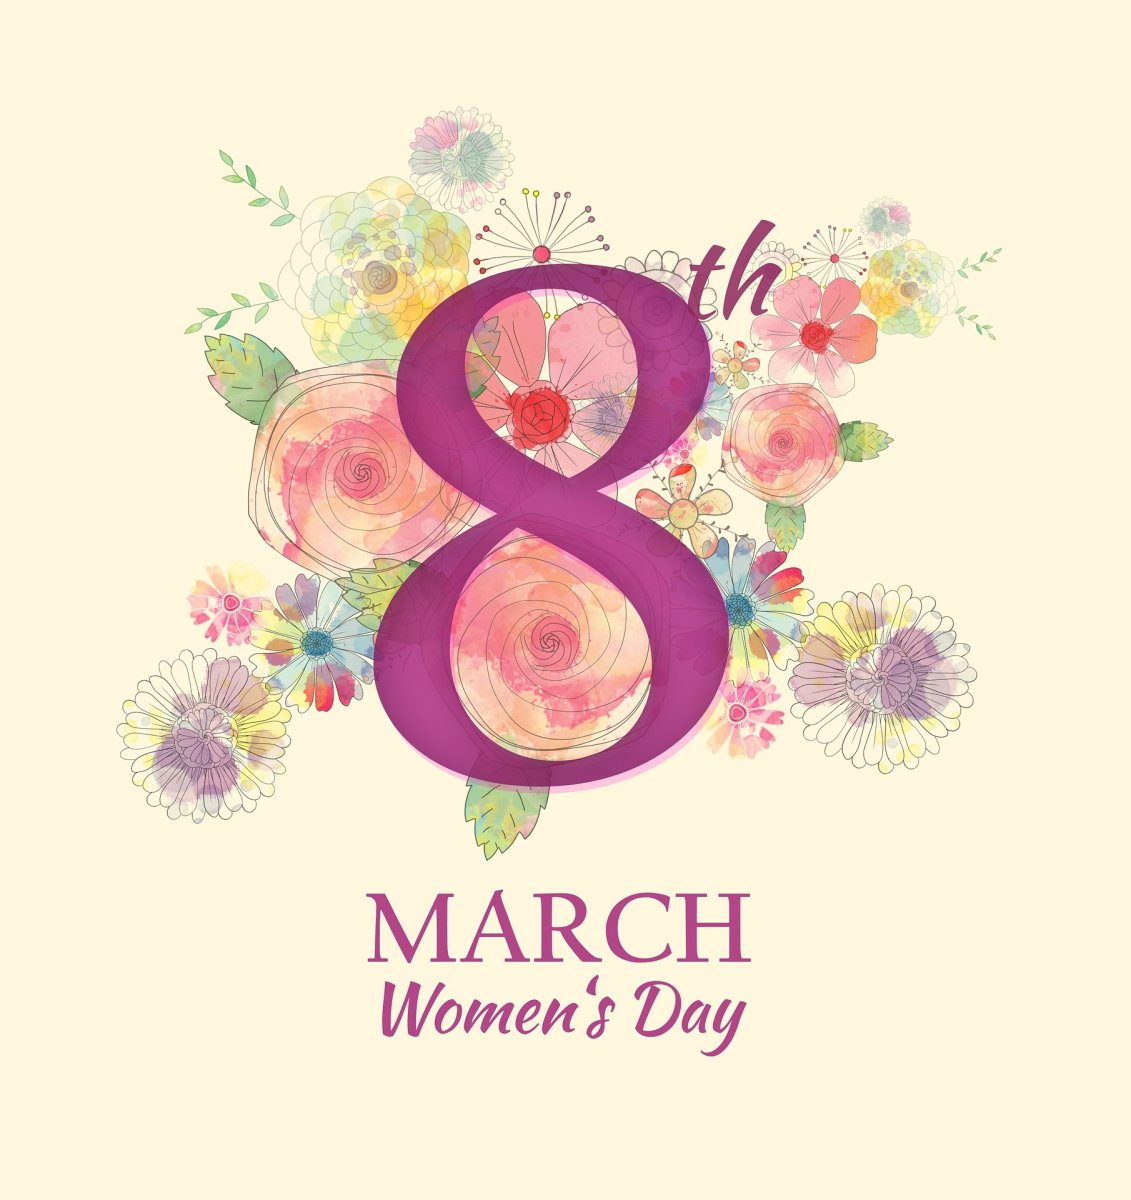 A card celebrating March 8 as International Women's Day